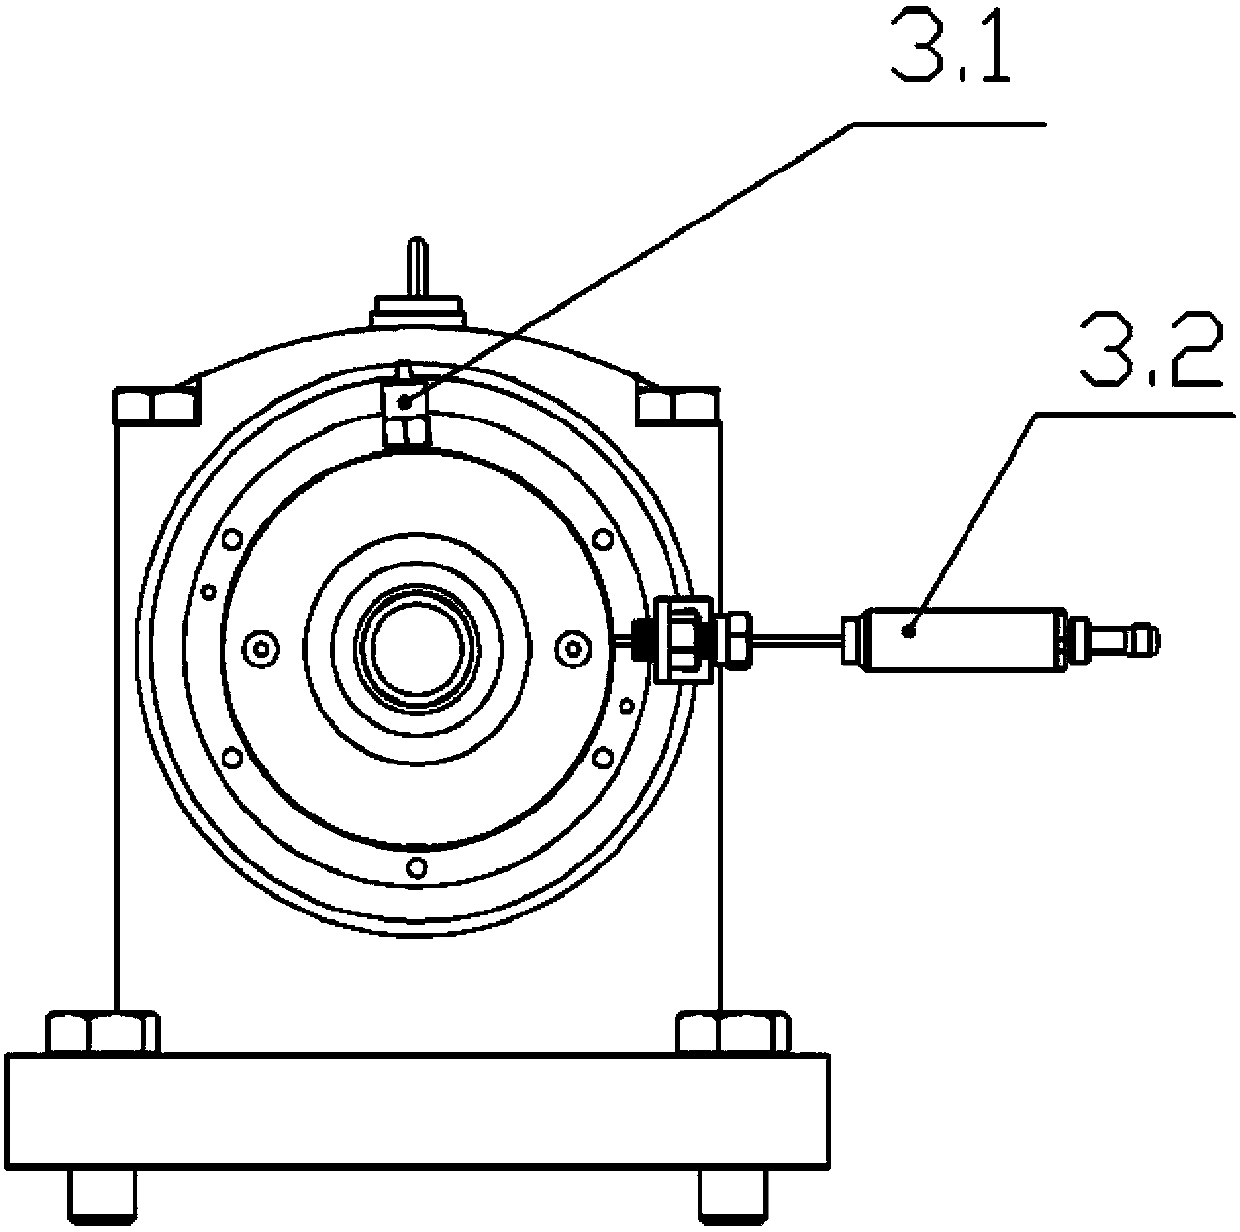 A test method for double-drive electric spindle